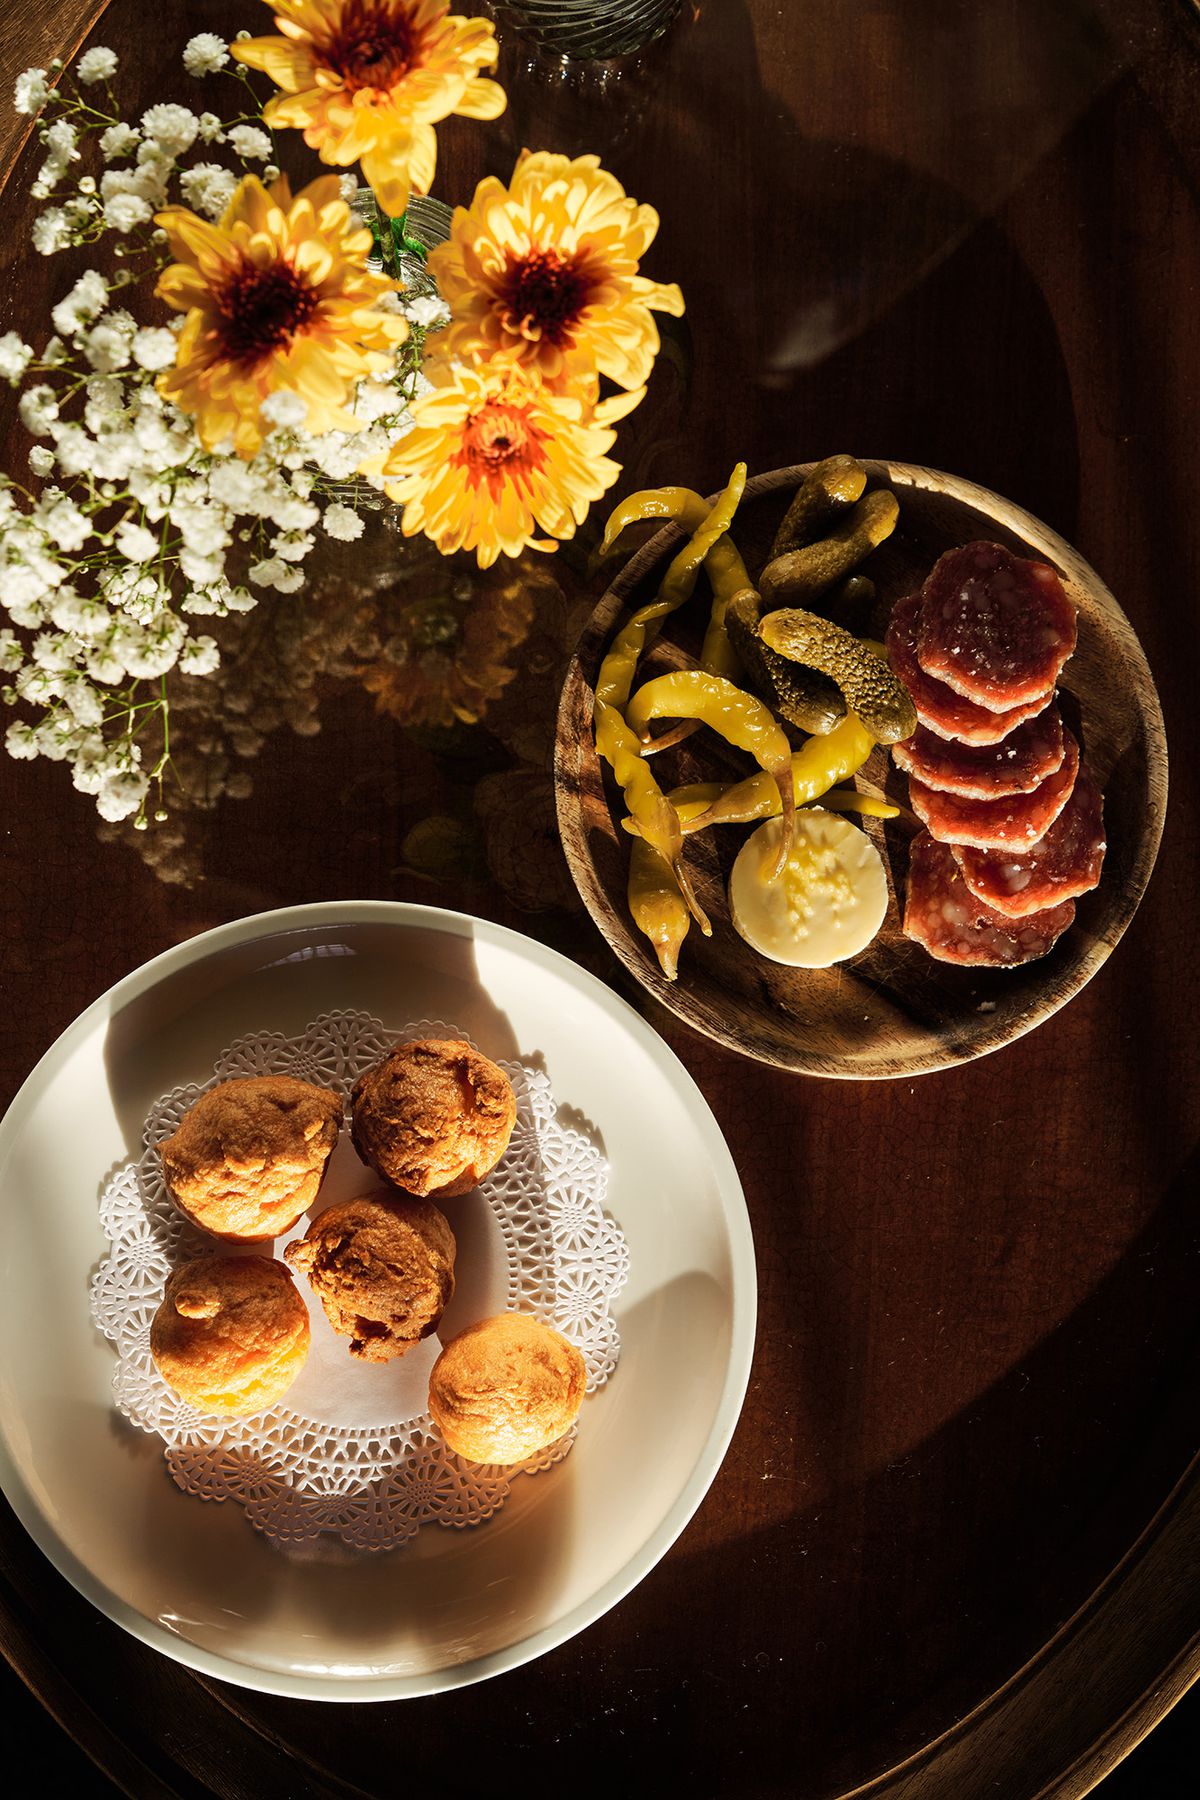 Gougeres and sausages with butter and pickles at Le Champ.